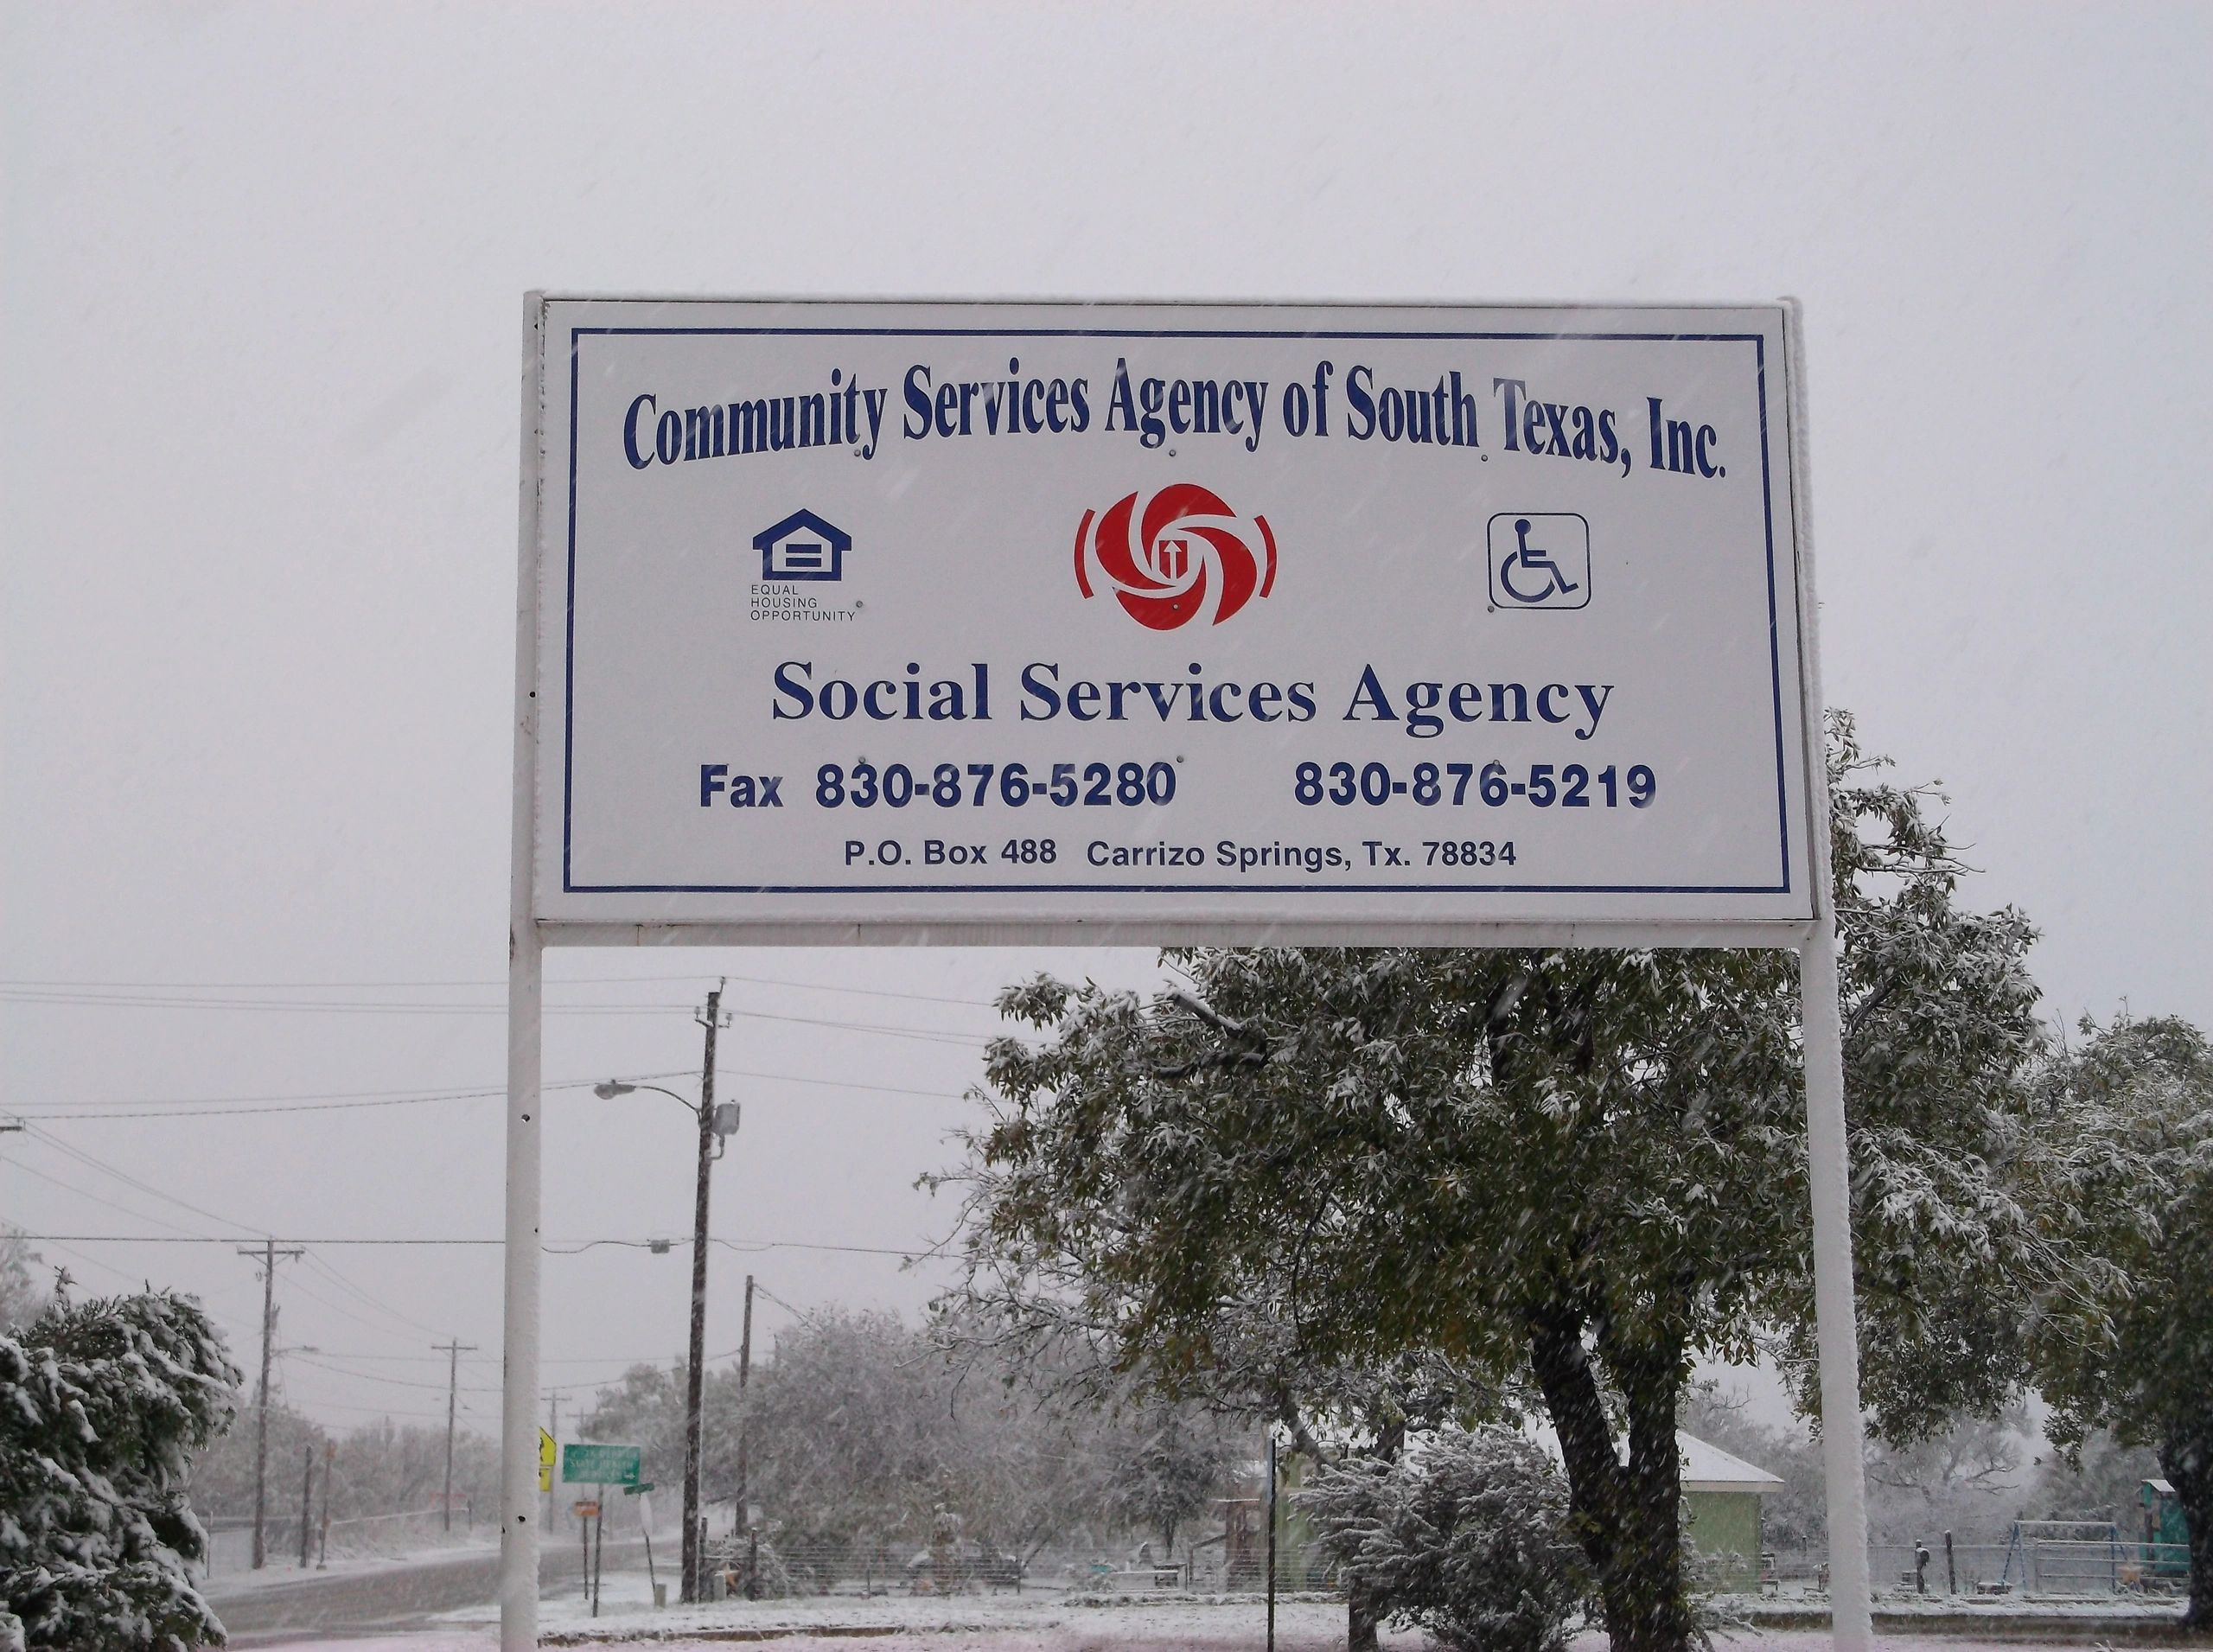 Community Services Agency of South Texas